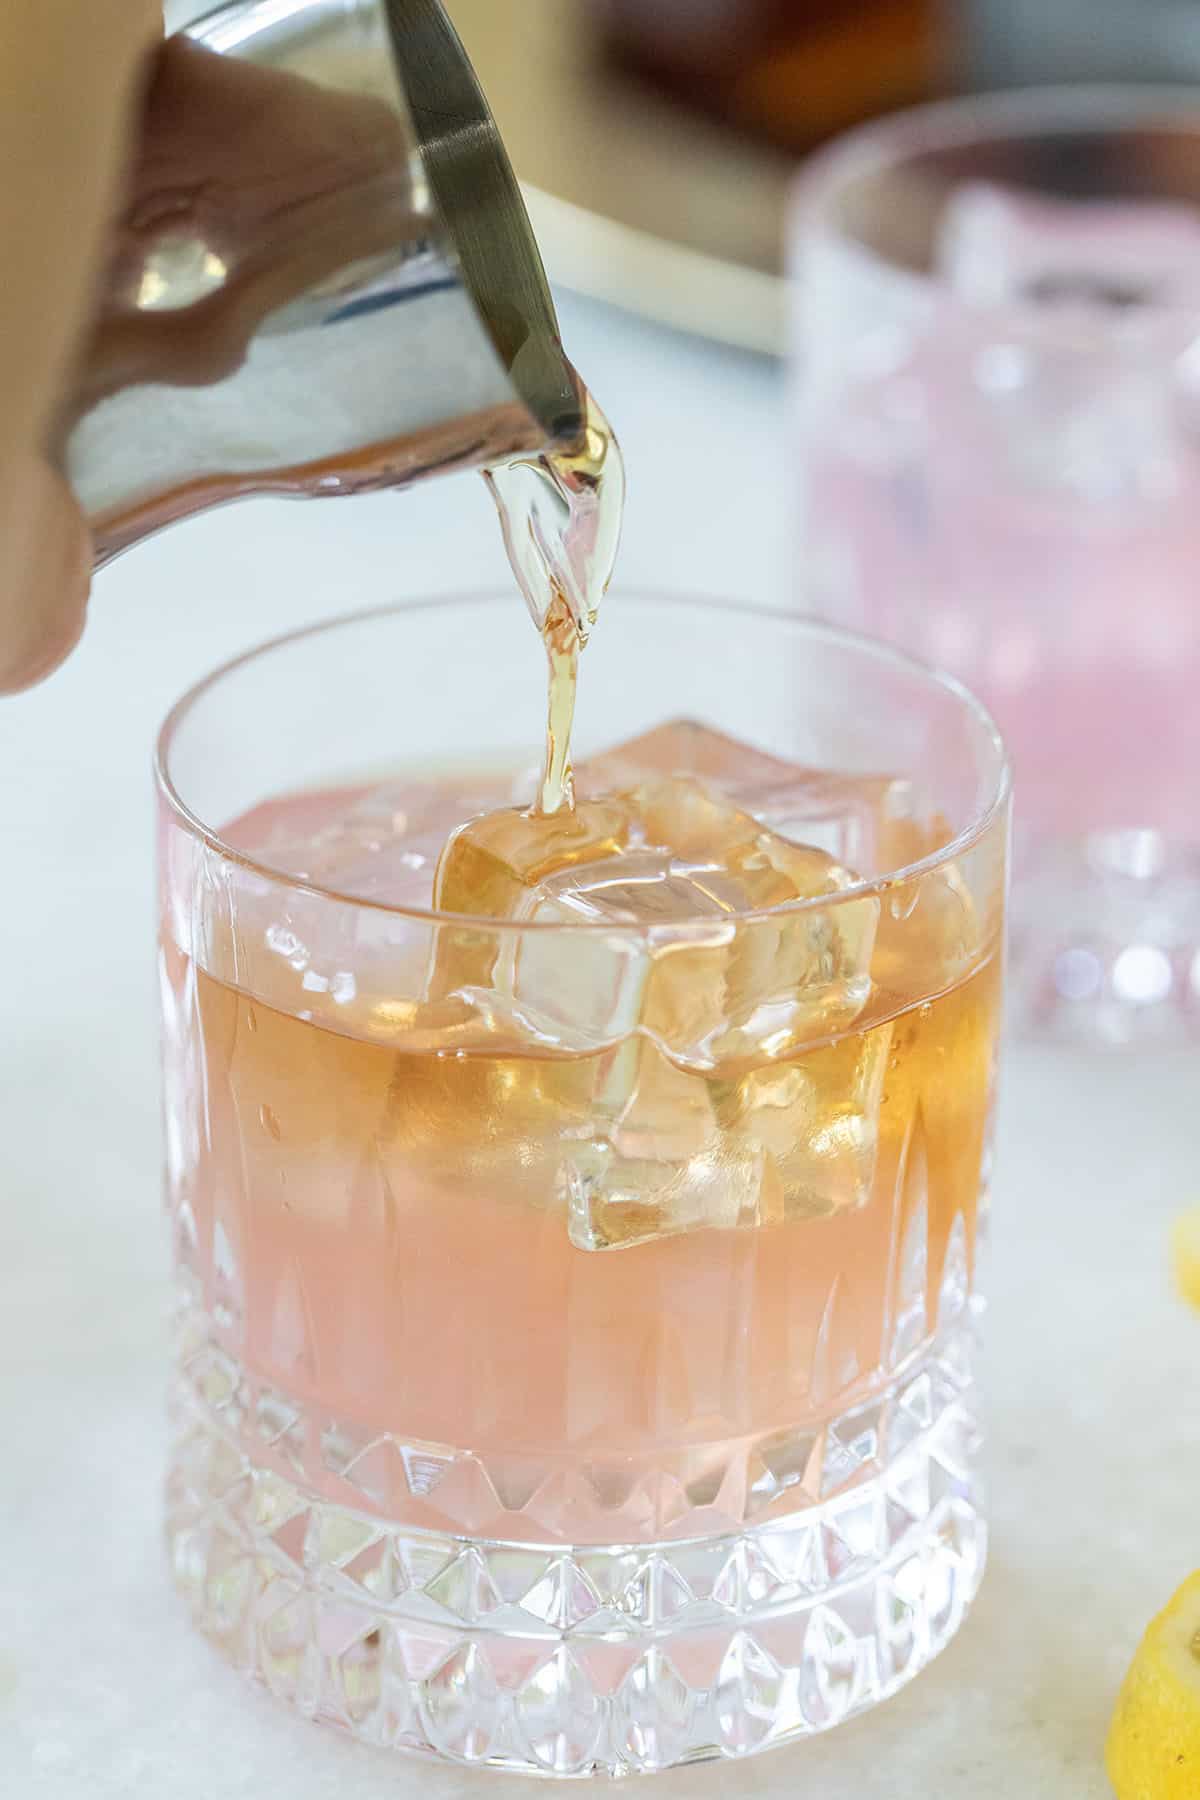 Brown spirit being poured over ice in a cocktail glass.